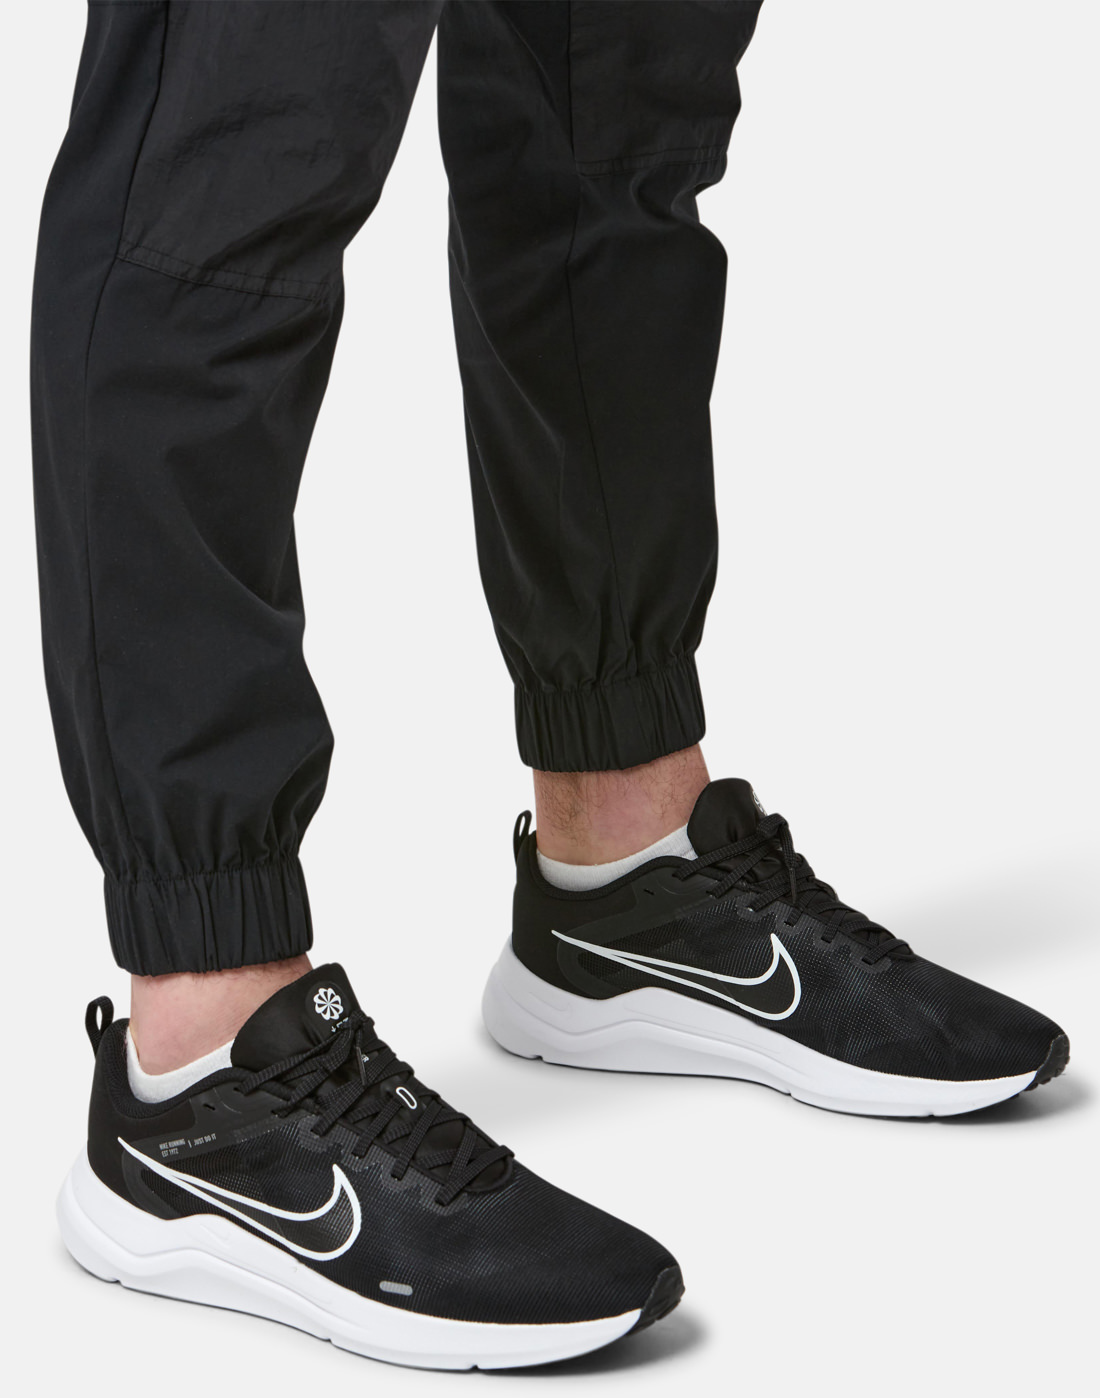 Nike Mens Downshifter 12 - Black | Life Style Sports IE